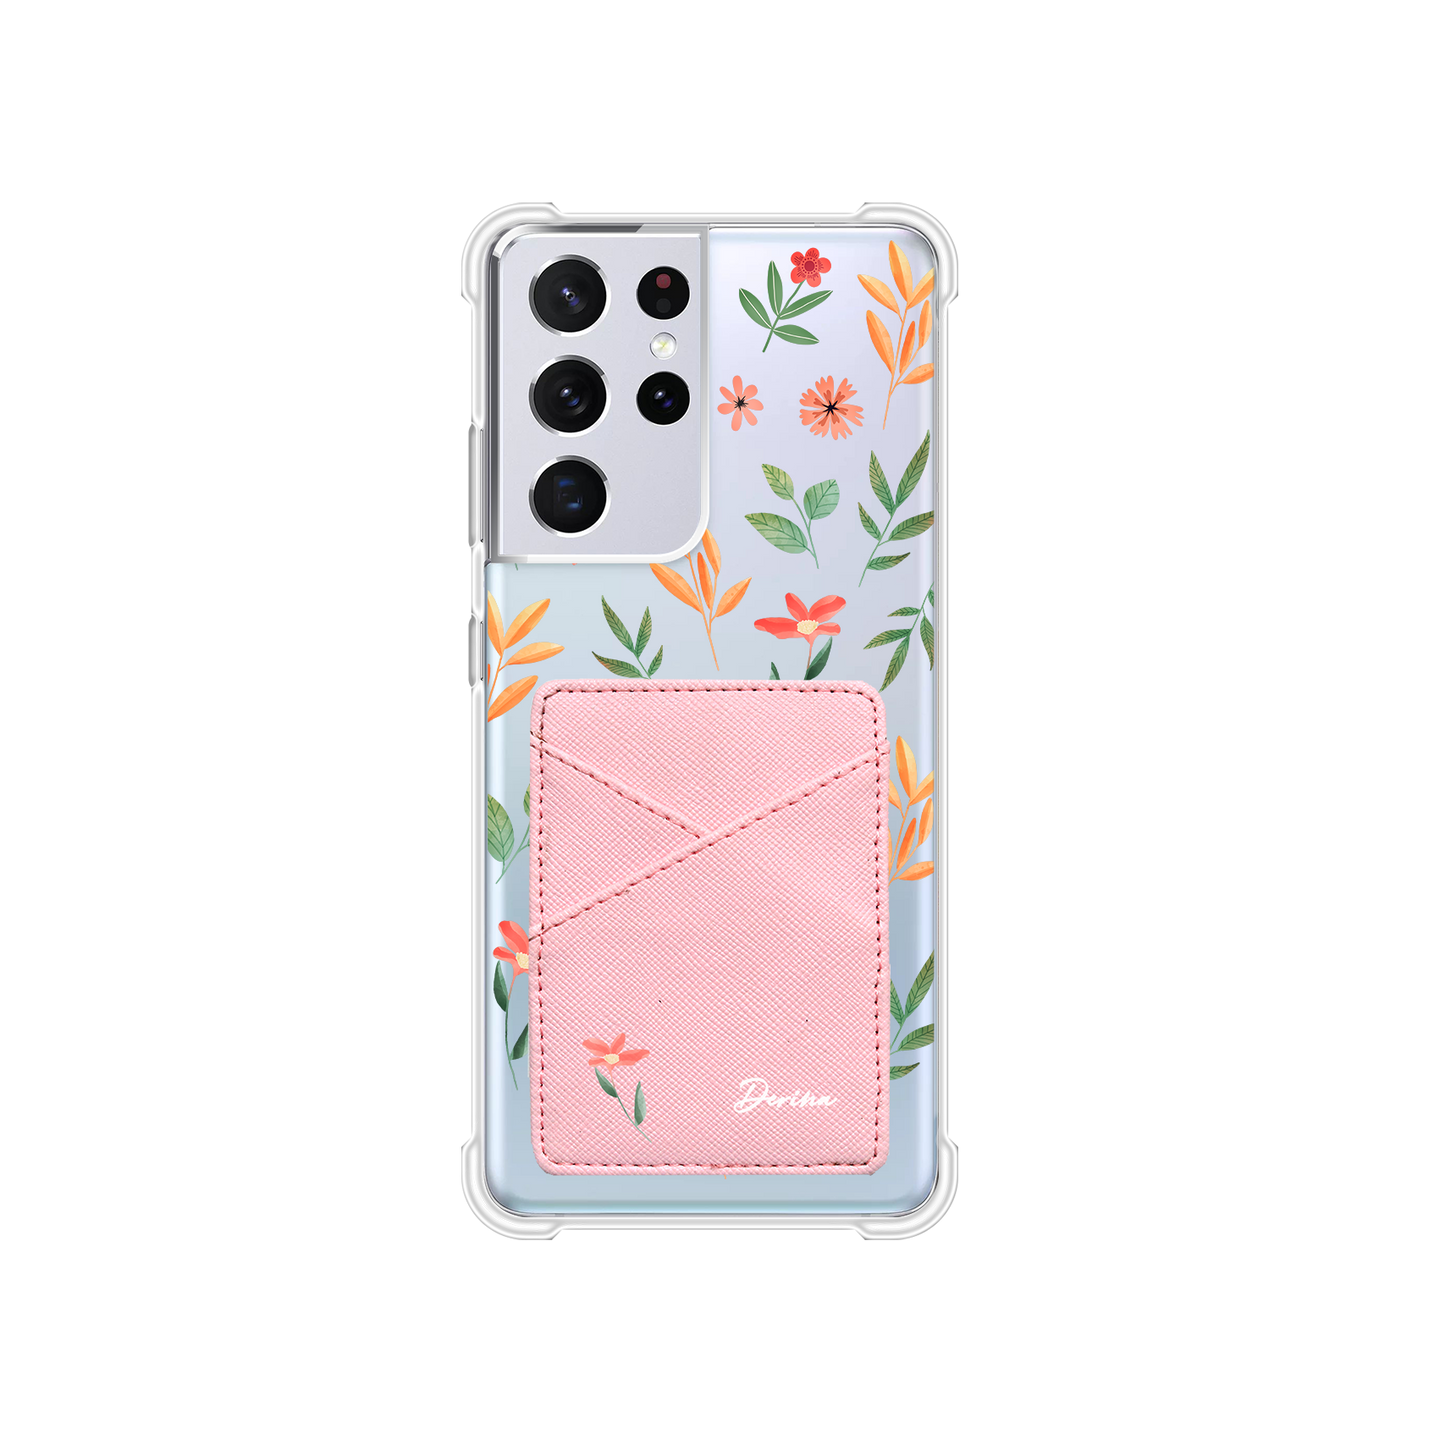 Android Phone Wallet Case - Birth Flowers 2.0